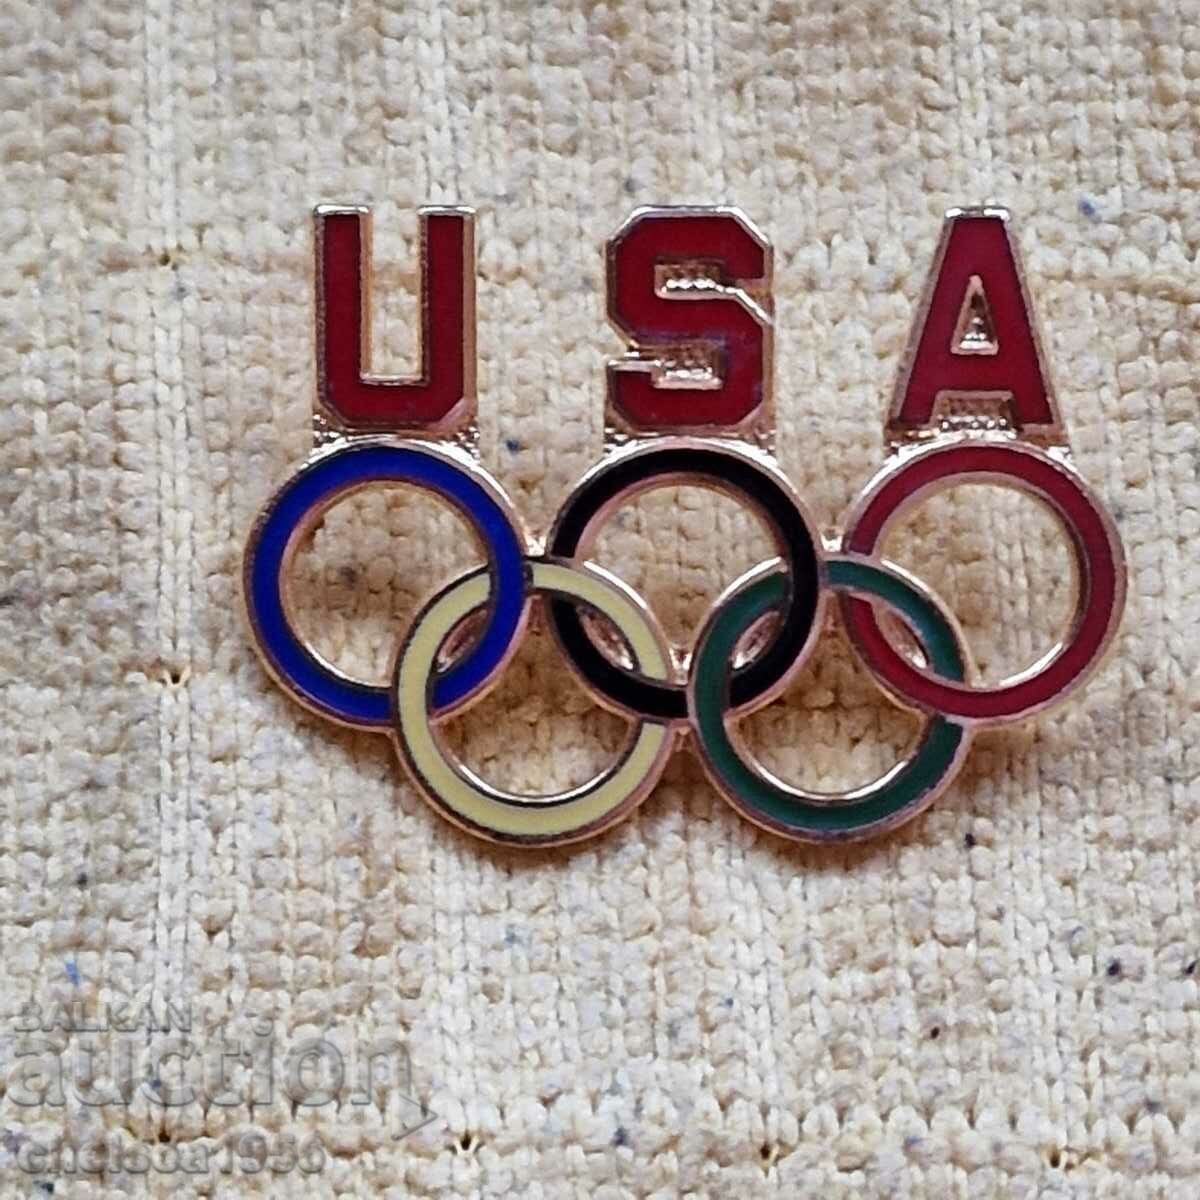 USA Olympic Committee Badge Large